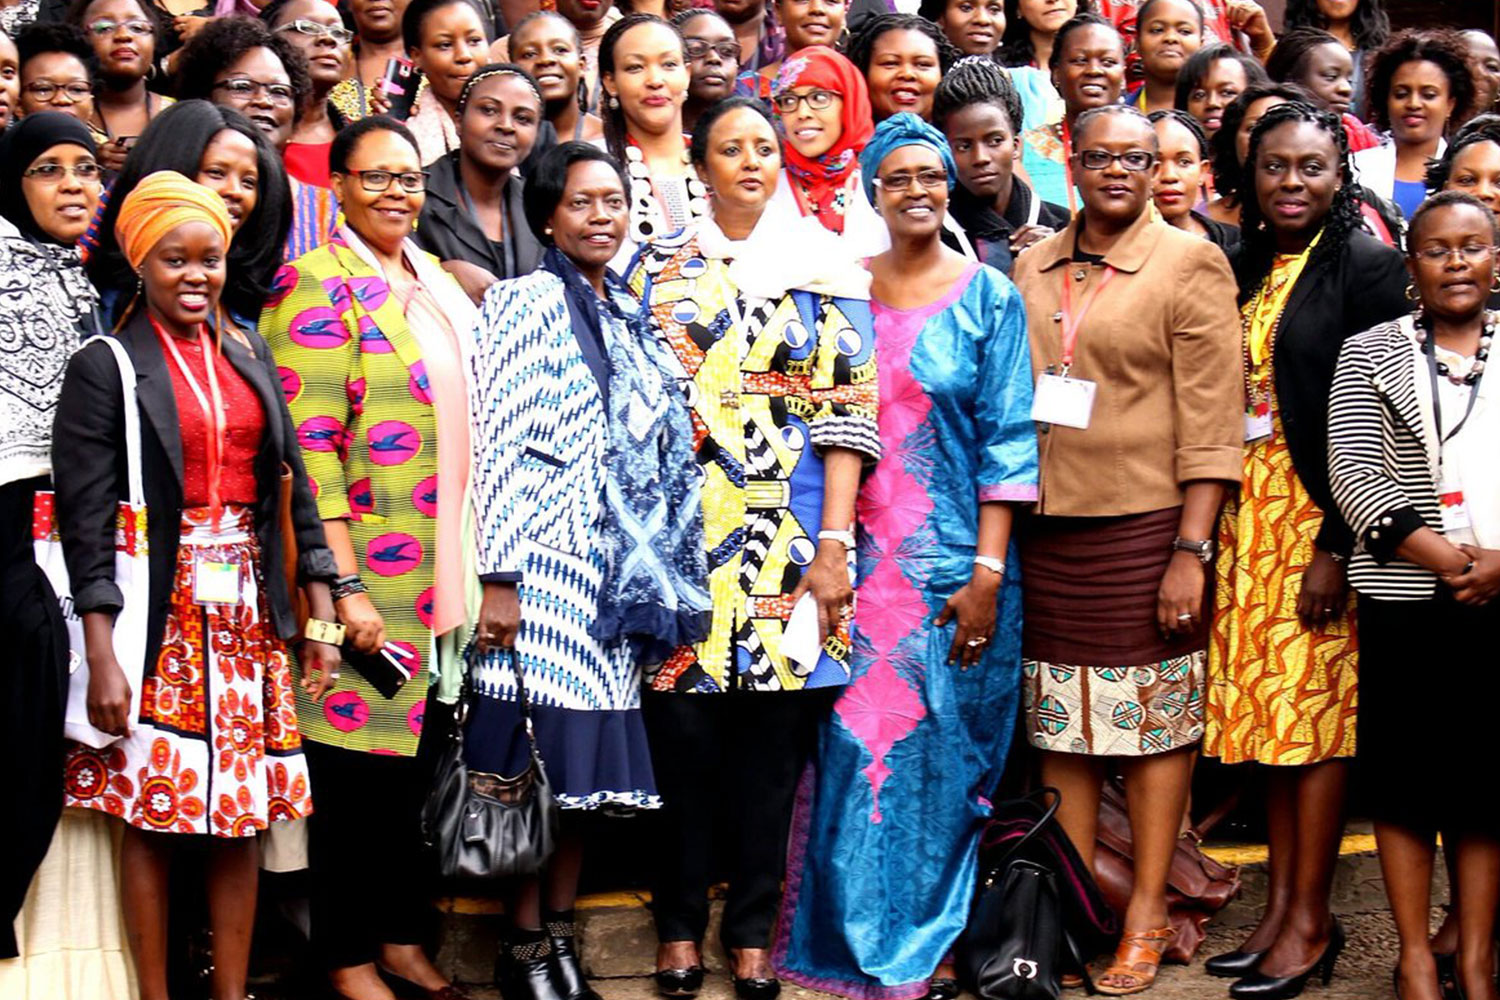 African Women leaders gather in Nairobi, discuss empowerment The